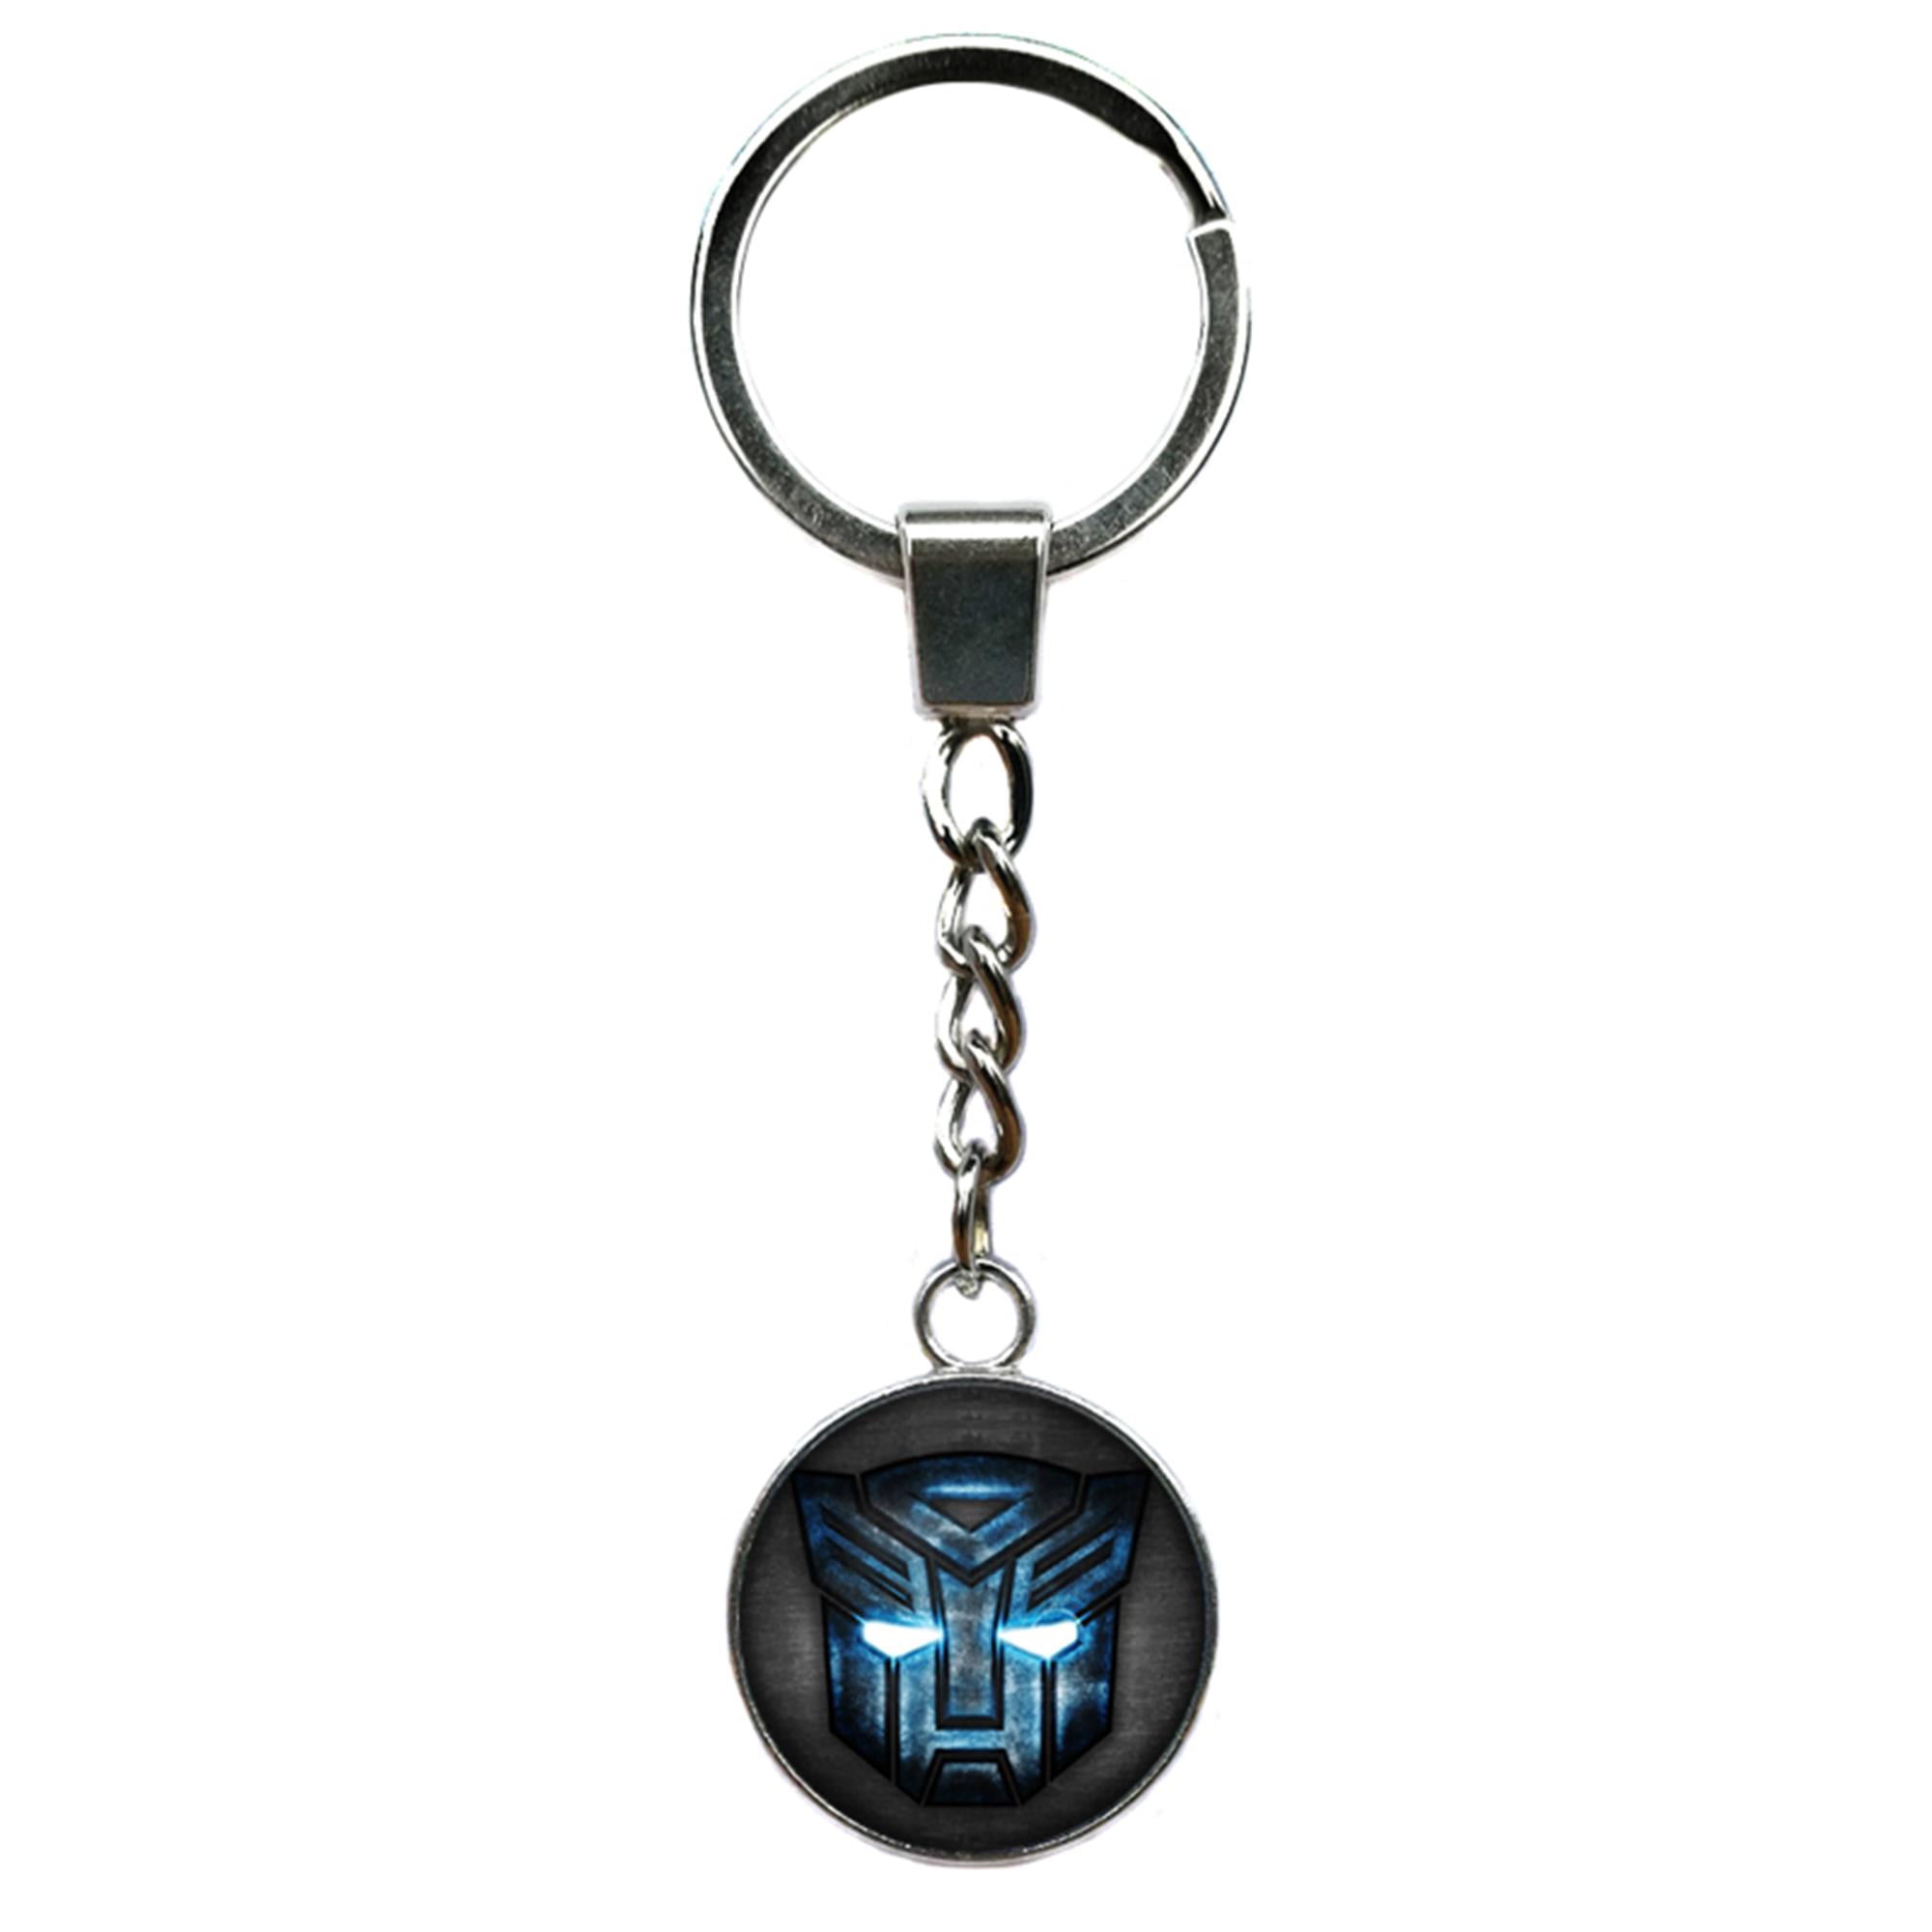 Transformers Autobot Decepticon Symbol Keychain Metal~1 Pair~HIS & HERS~GIFT NEW